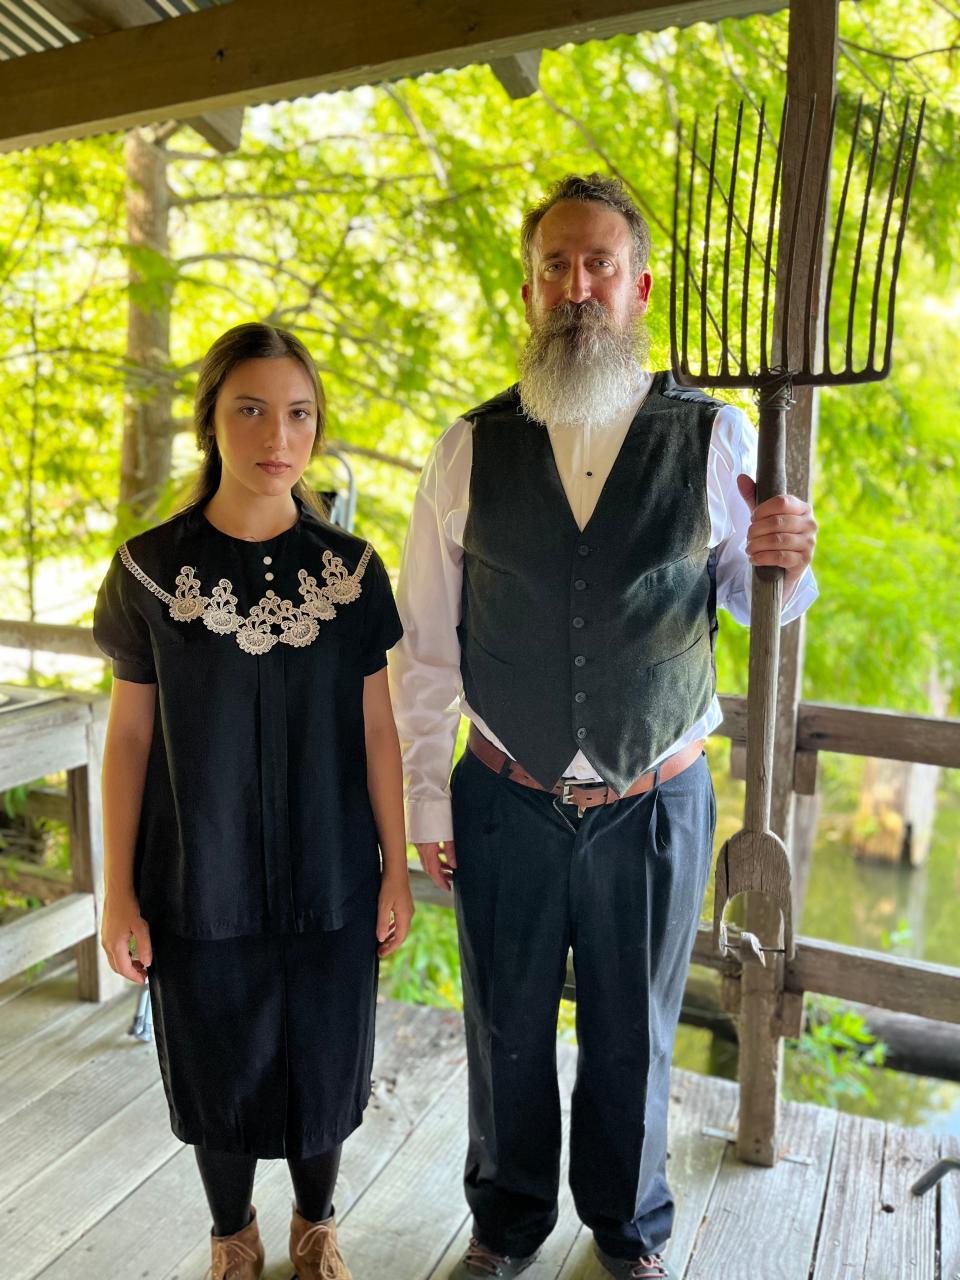 Renee Reed and Hick Cheramie in a photo titled "Cajun Gothic." The photo was taken on set of the upcoming short film Evangeline, a psychological horror based on the folktales of the Rougarou and Evangeline. The film is set for release next year at the New Orleans Film Festival.